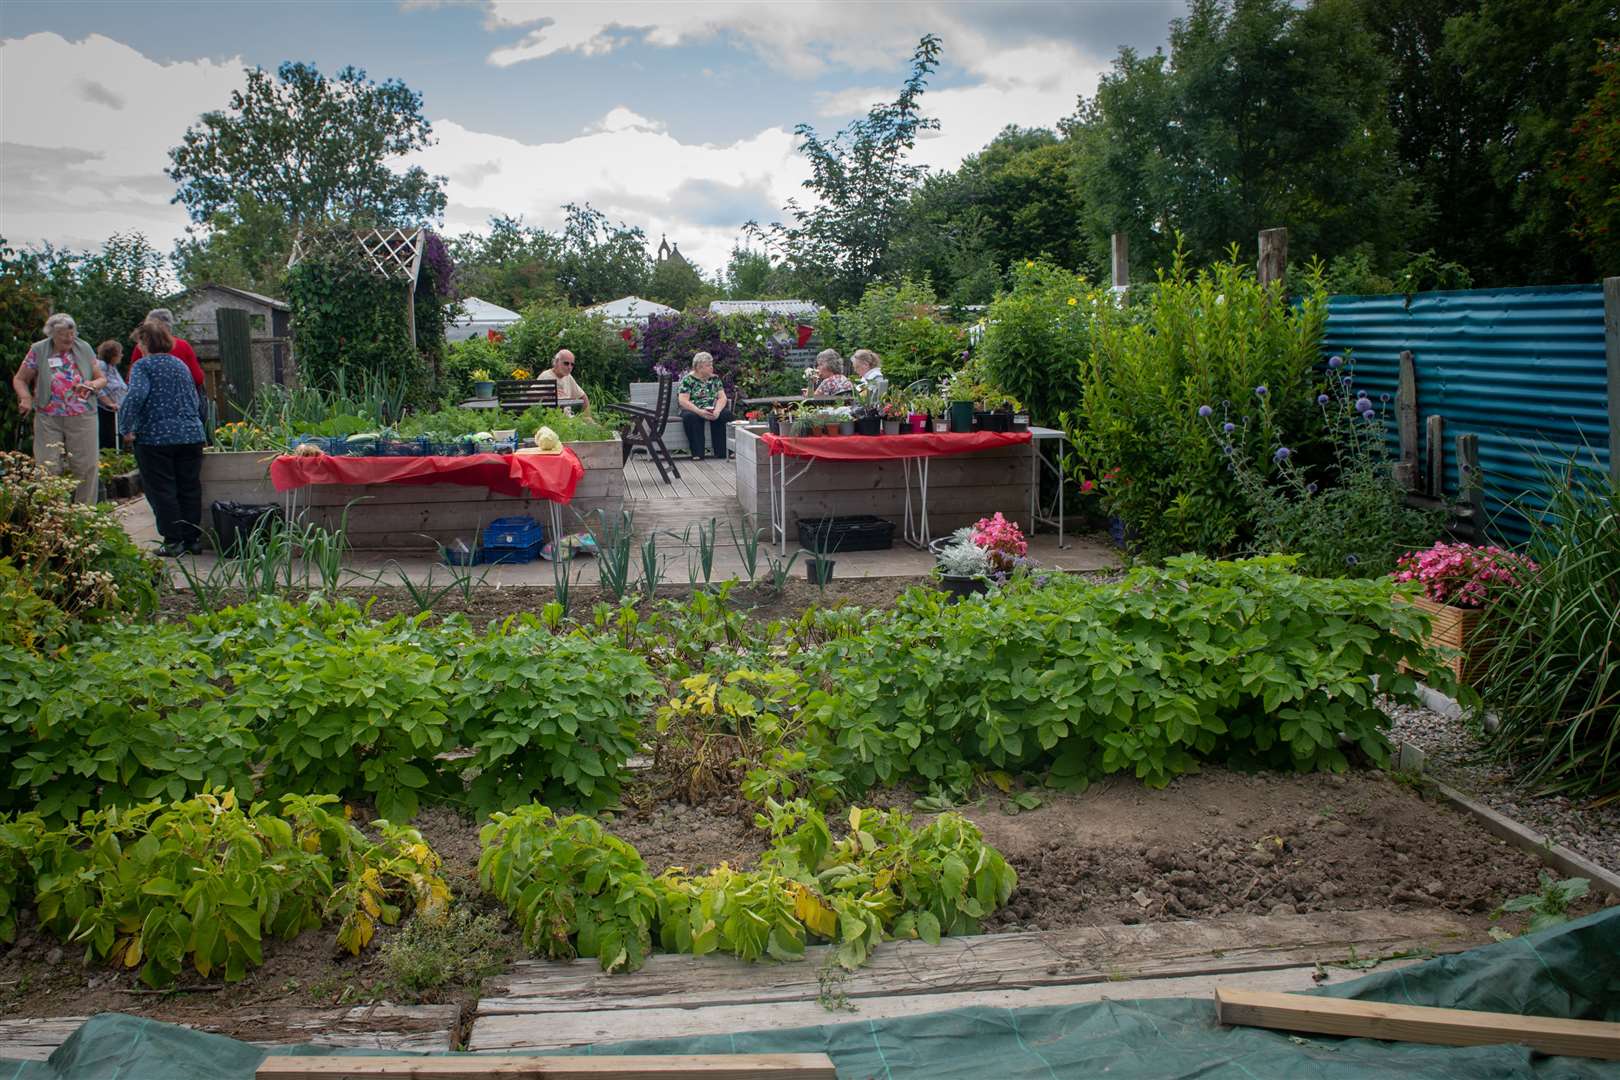 A once-derelict plot has been transformed into a flourishing community garden.